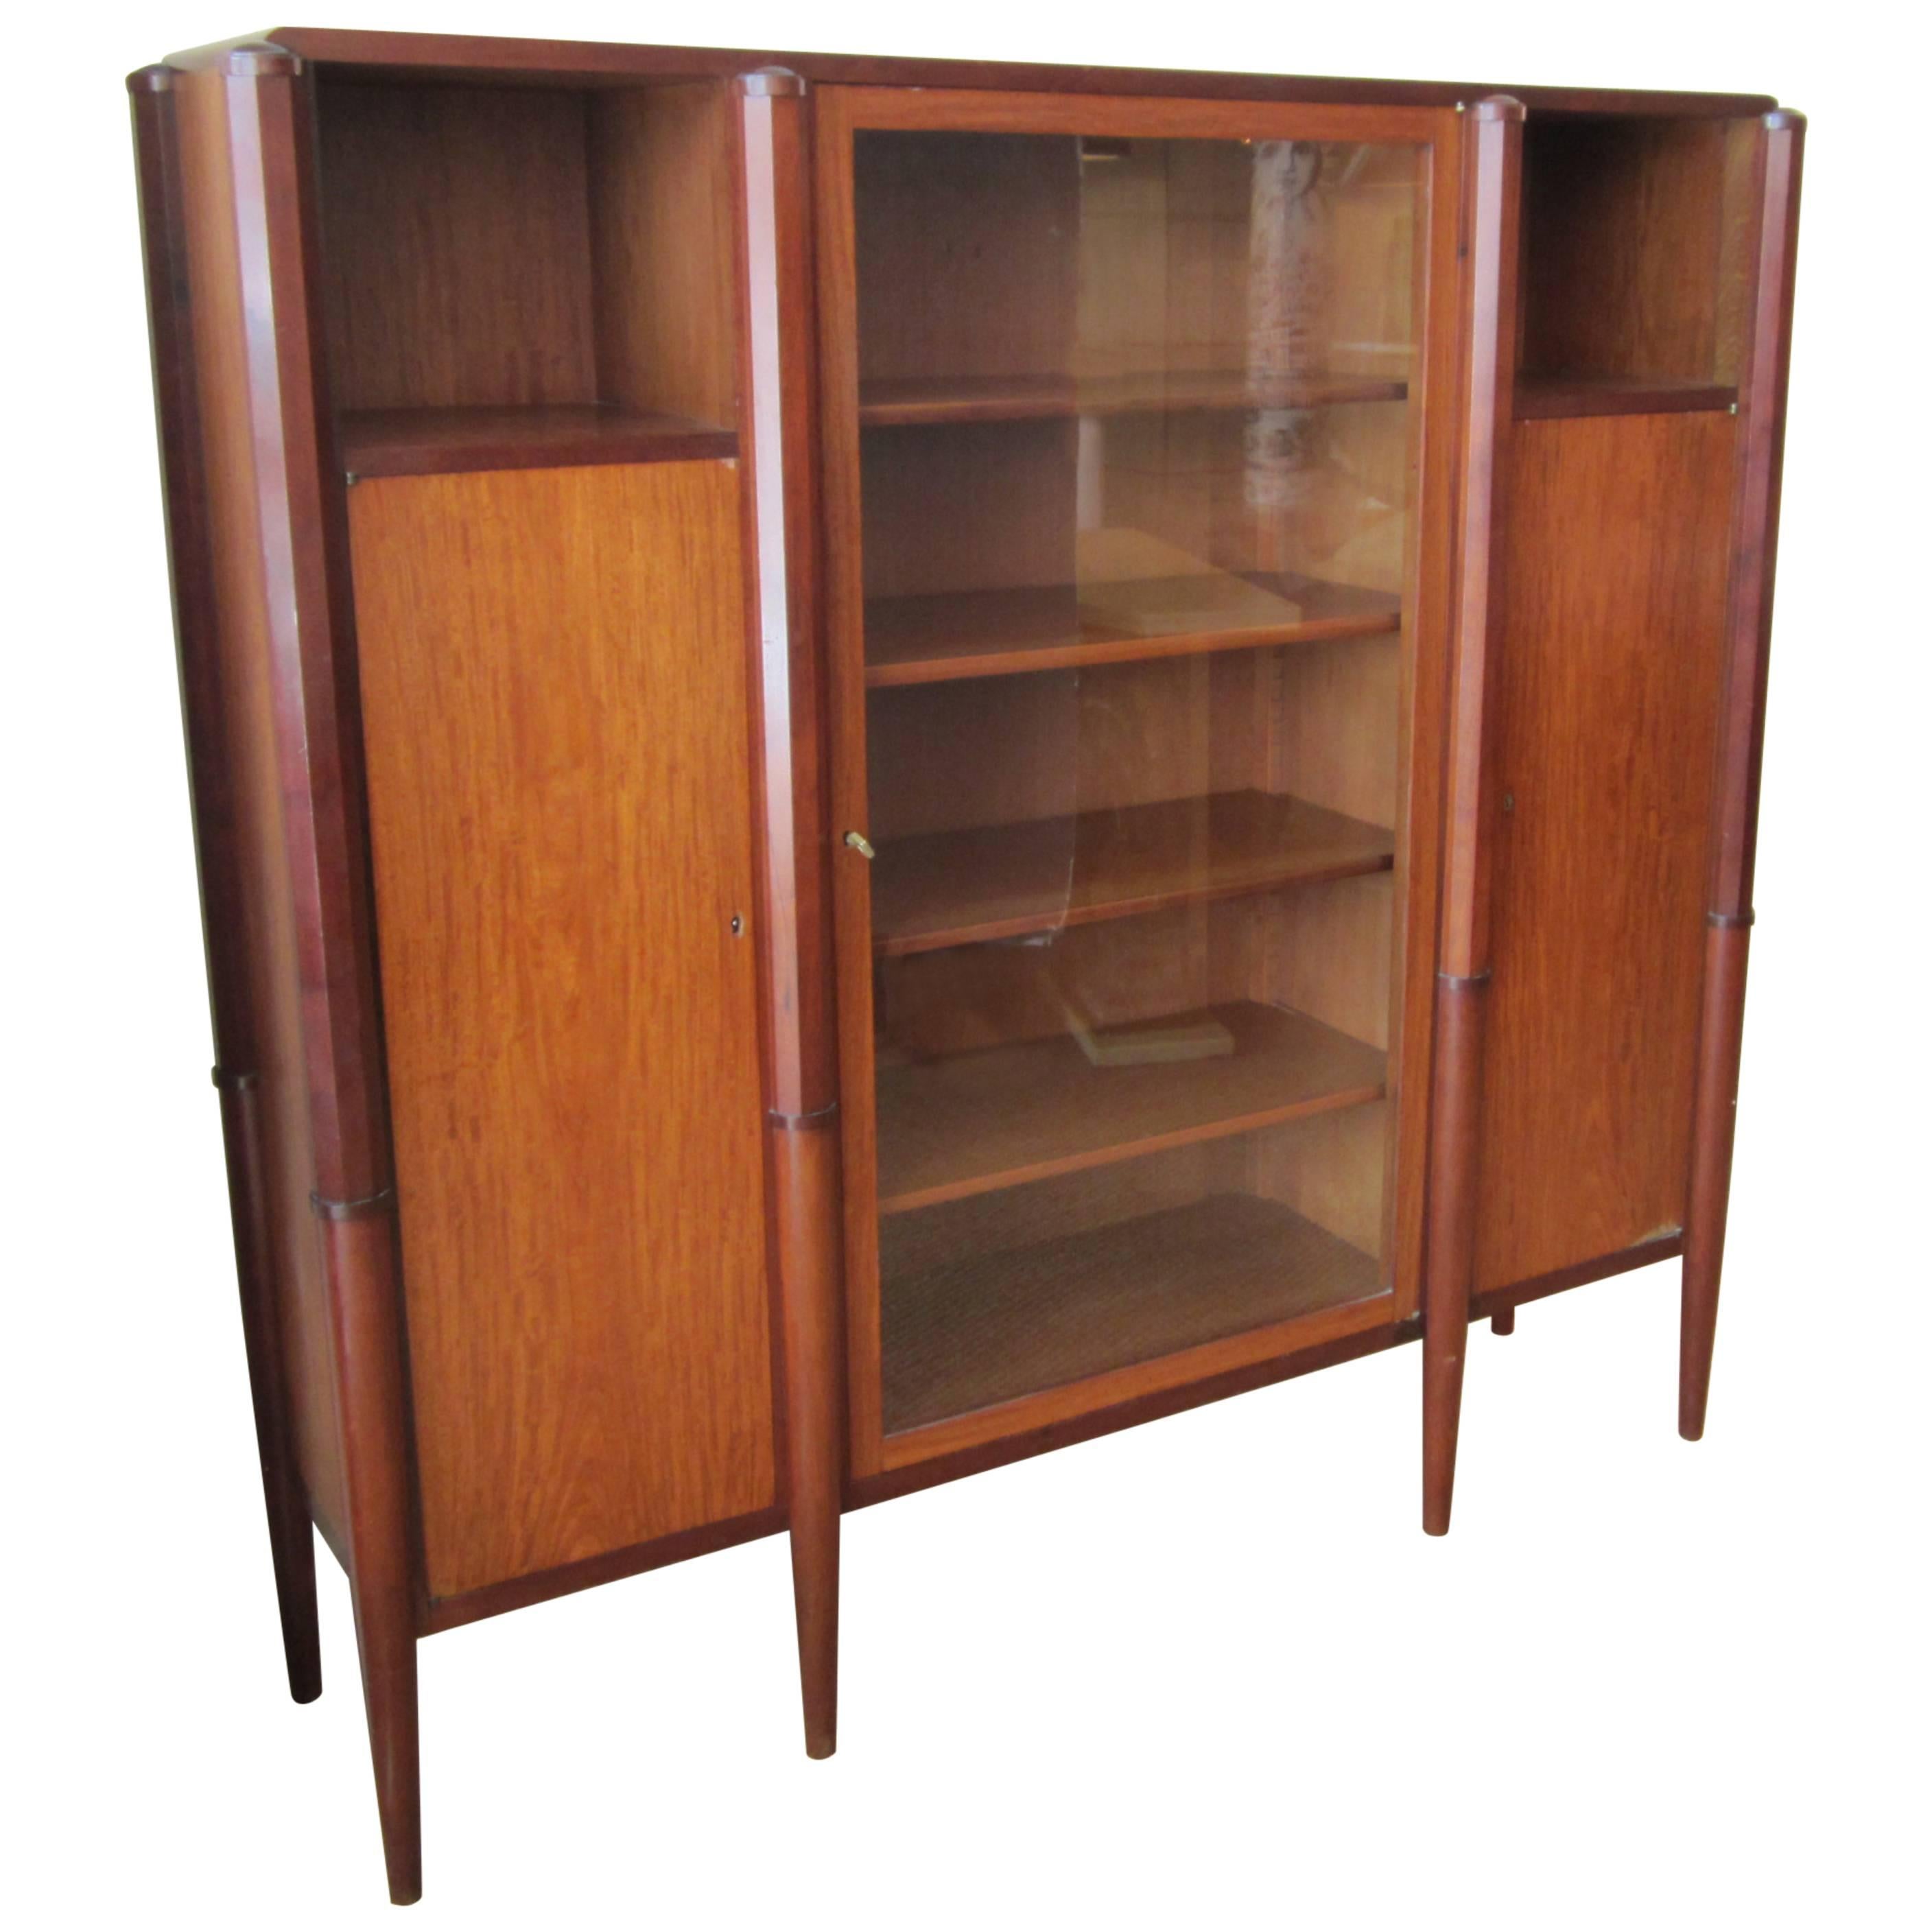 French Art Deco Book Case/ Cabinet Attributed to Maurice Dufrene For Sale